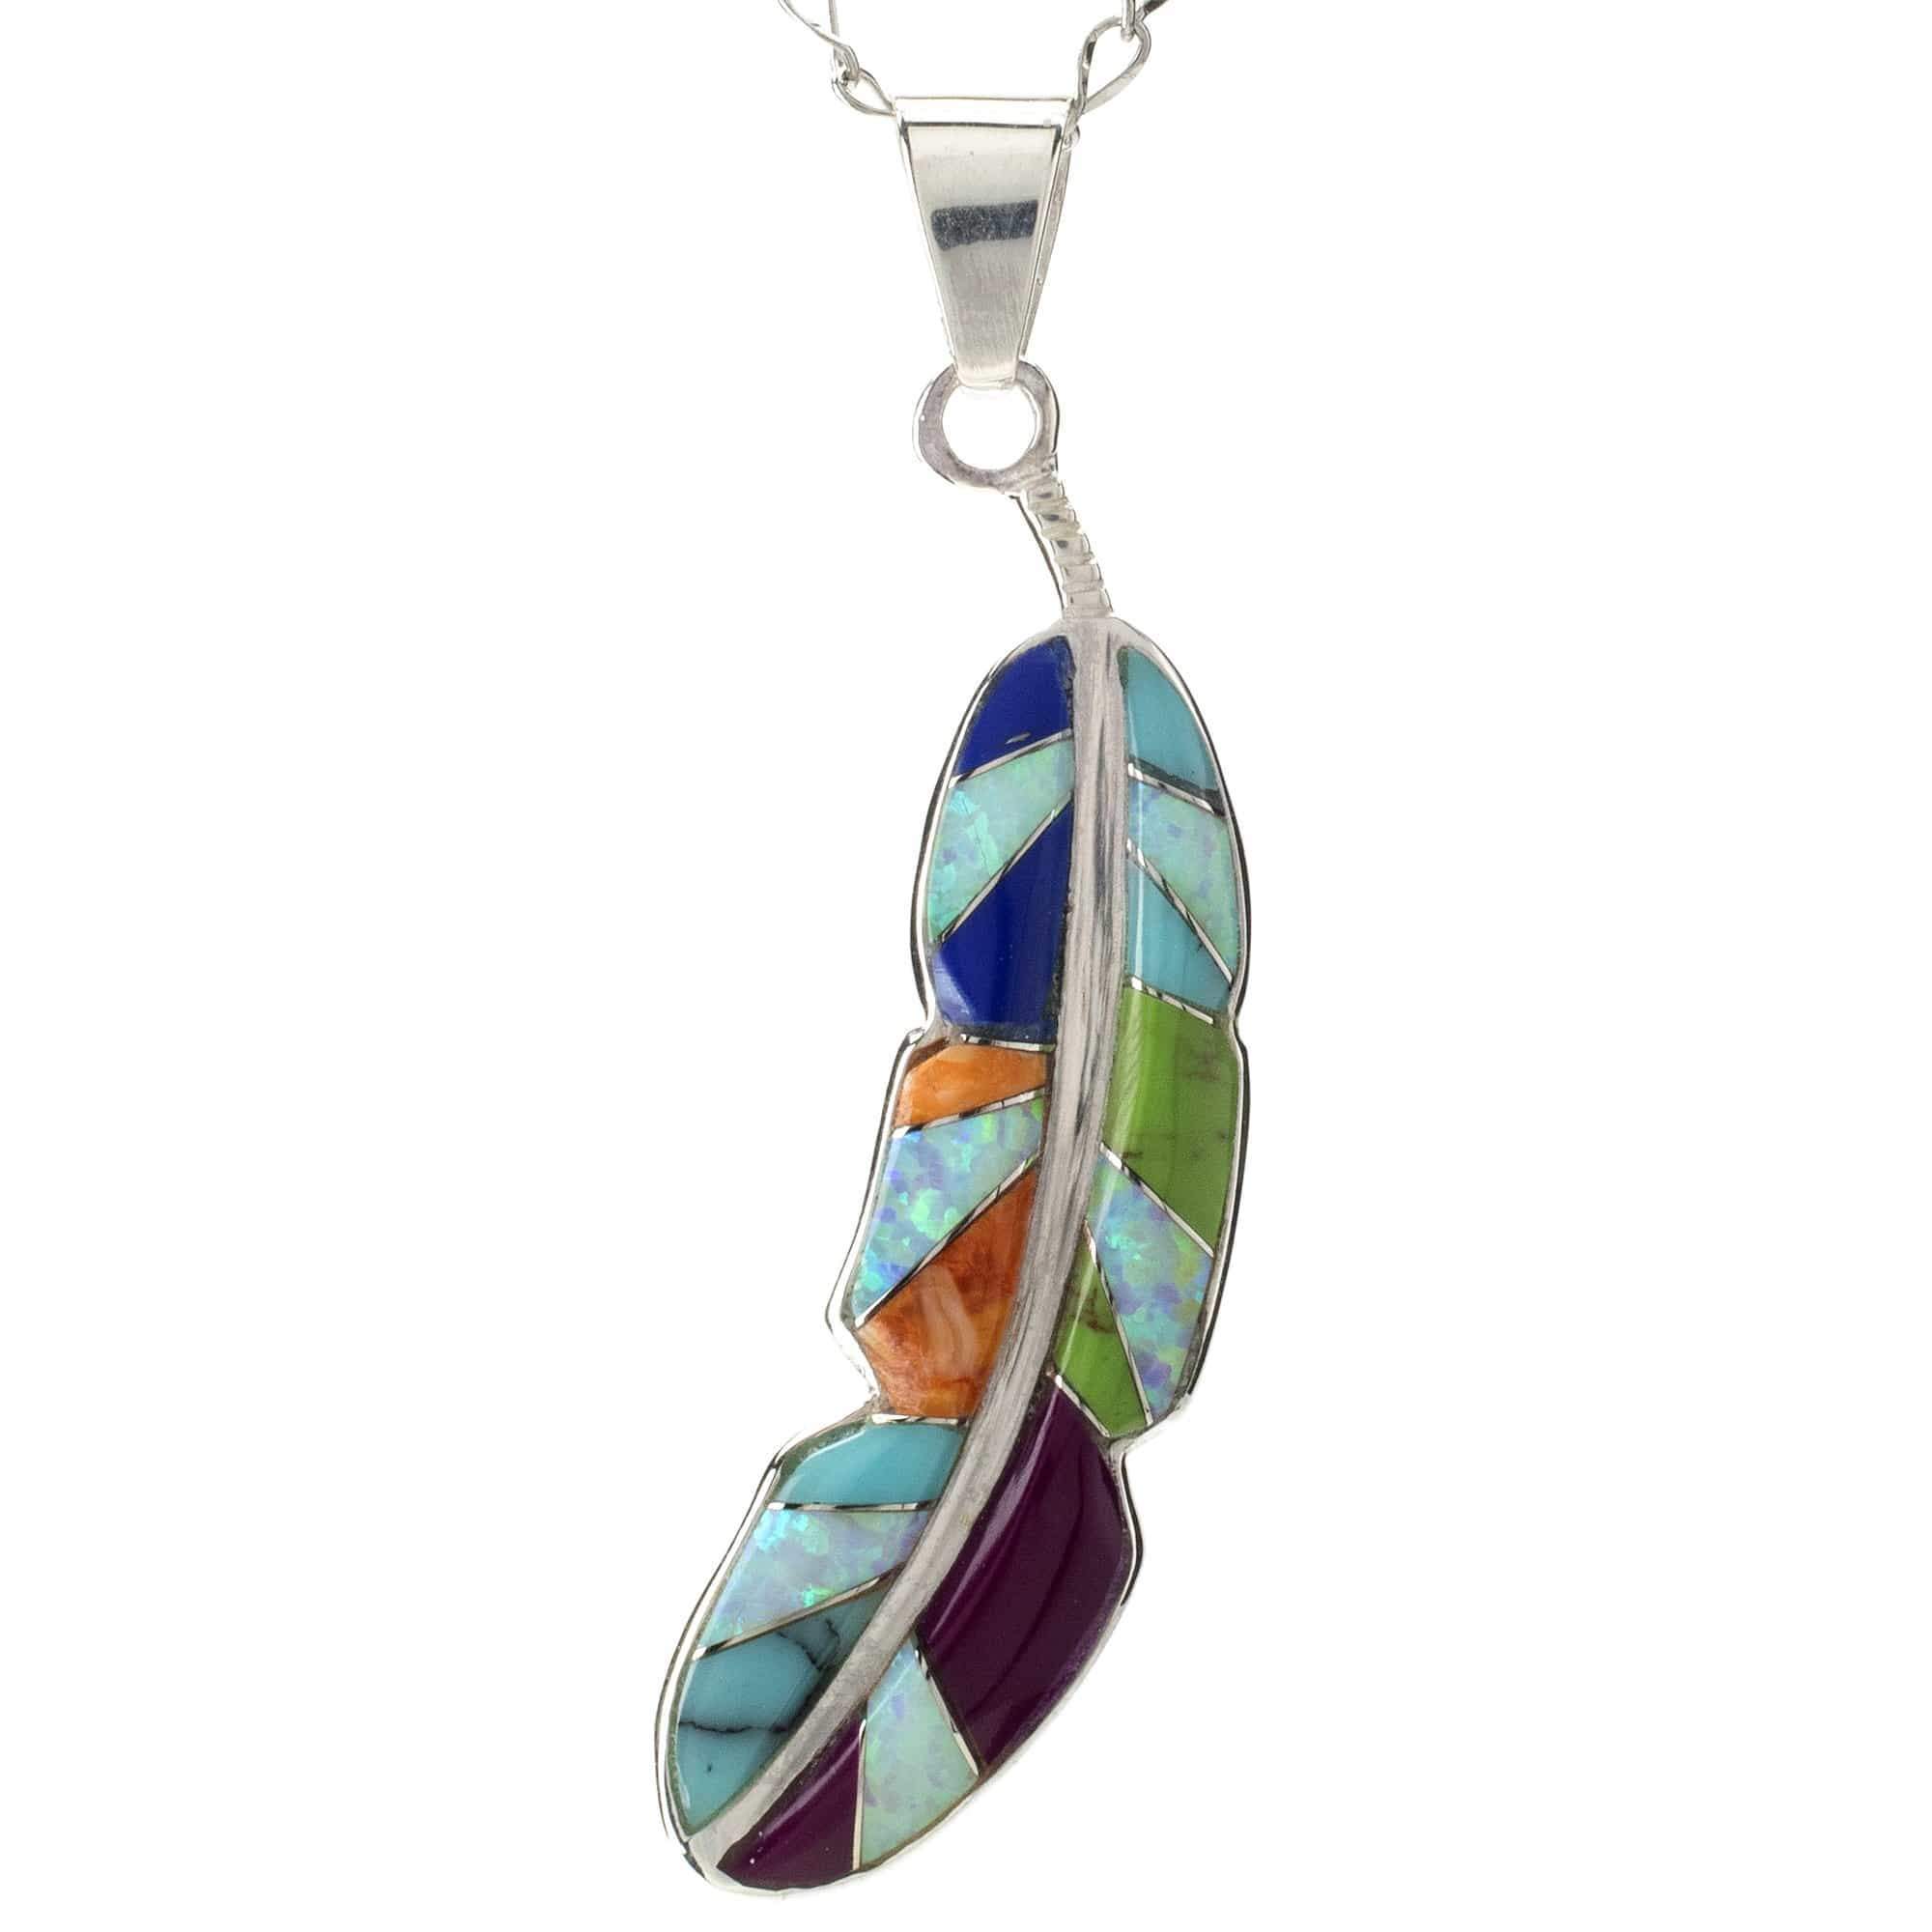 Kalifano Southwest Silver Jewelry Multi Gemstone Feather 925 Sterling Silver Pendant USA Handmade with Opal Accent NMN.2312.MT